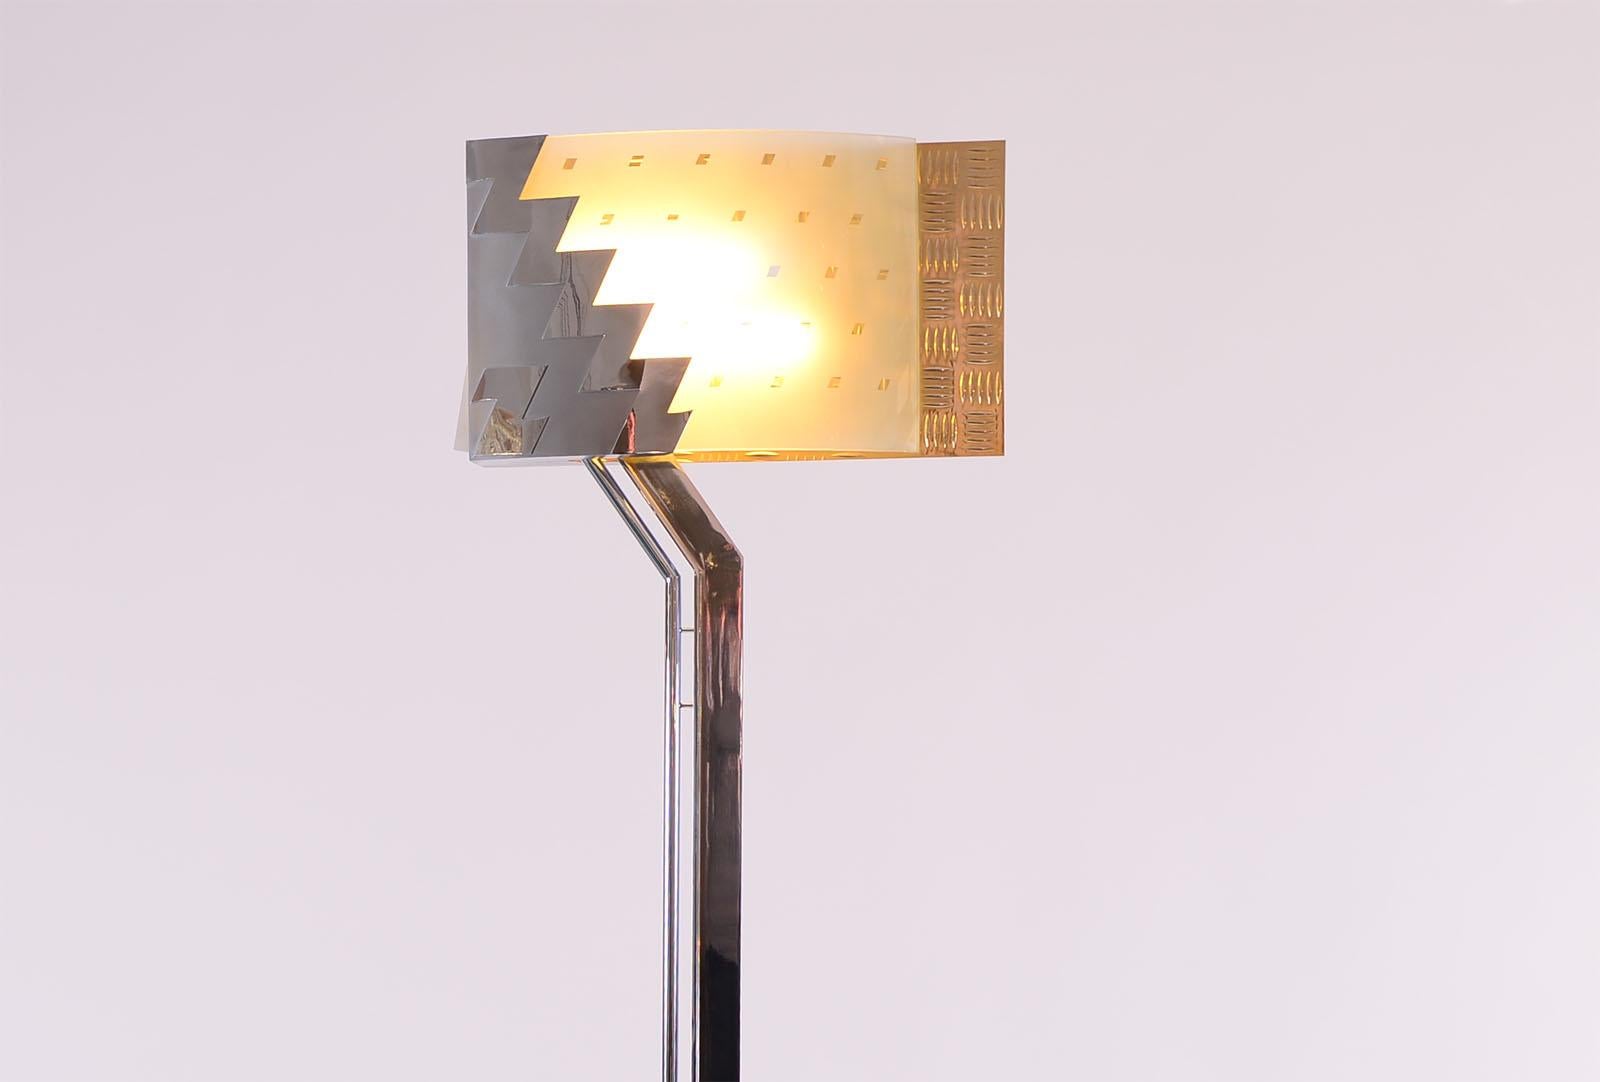 This lamp is unique and was designed by Hollein as pension gift for Dr. Karl Vak (he also was instrumental in the execution). Dr. Vak was longtime CEO of Vienna’s central bank, and an early patron and client by Hans Hollein. So also the famous Z